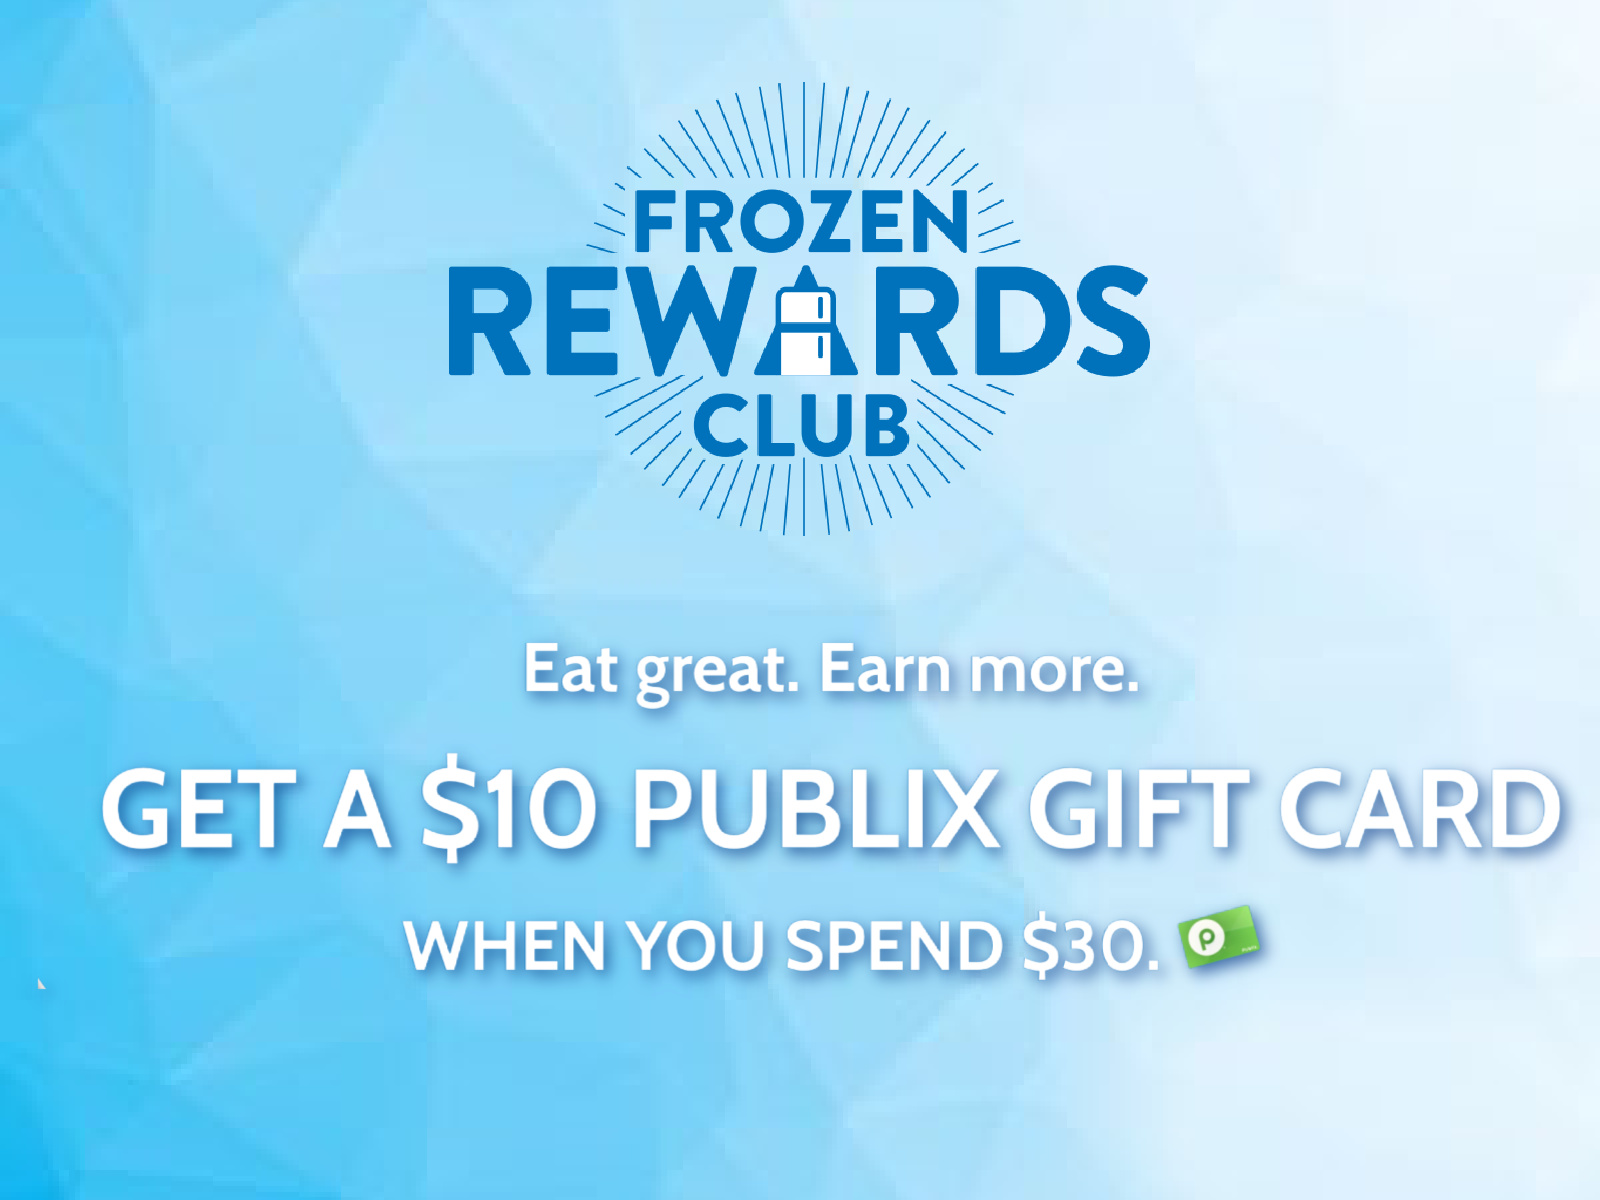 The Frozen Rewards Club Is Back For 2023 – Turn Frozen Foods Into Publix Gift Cards!